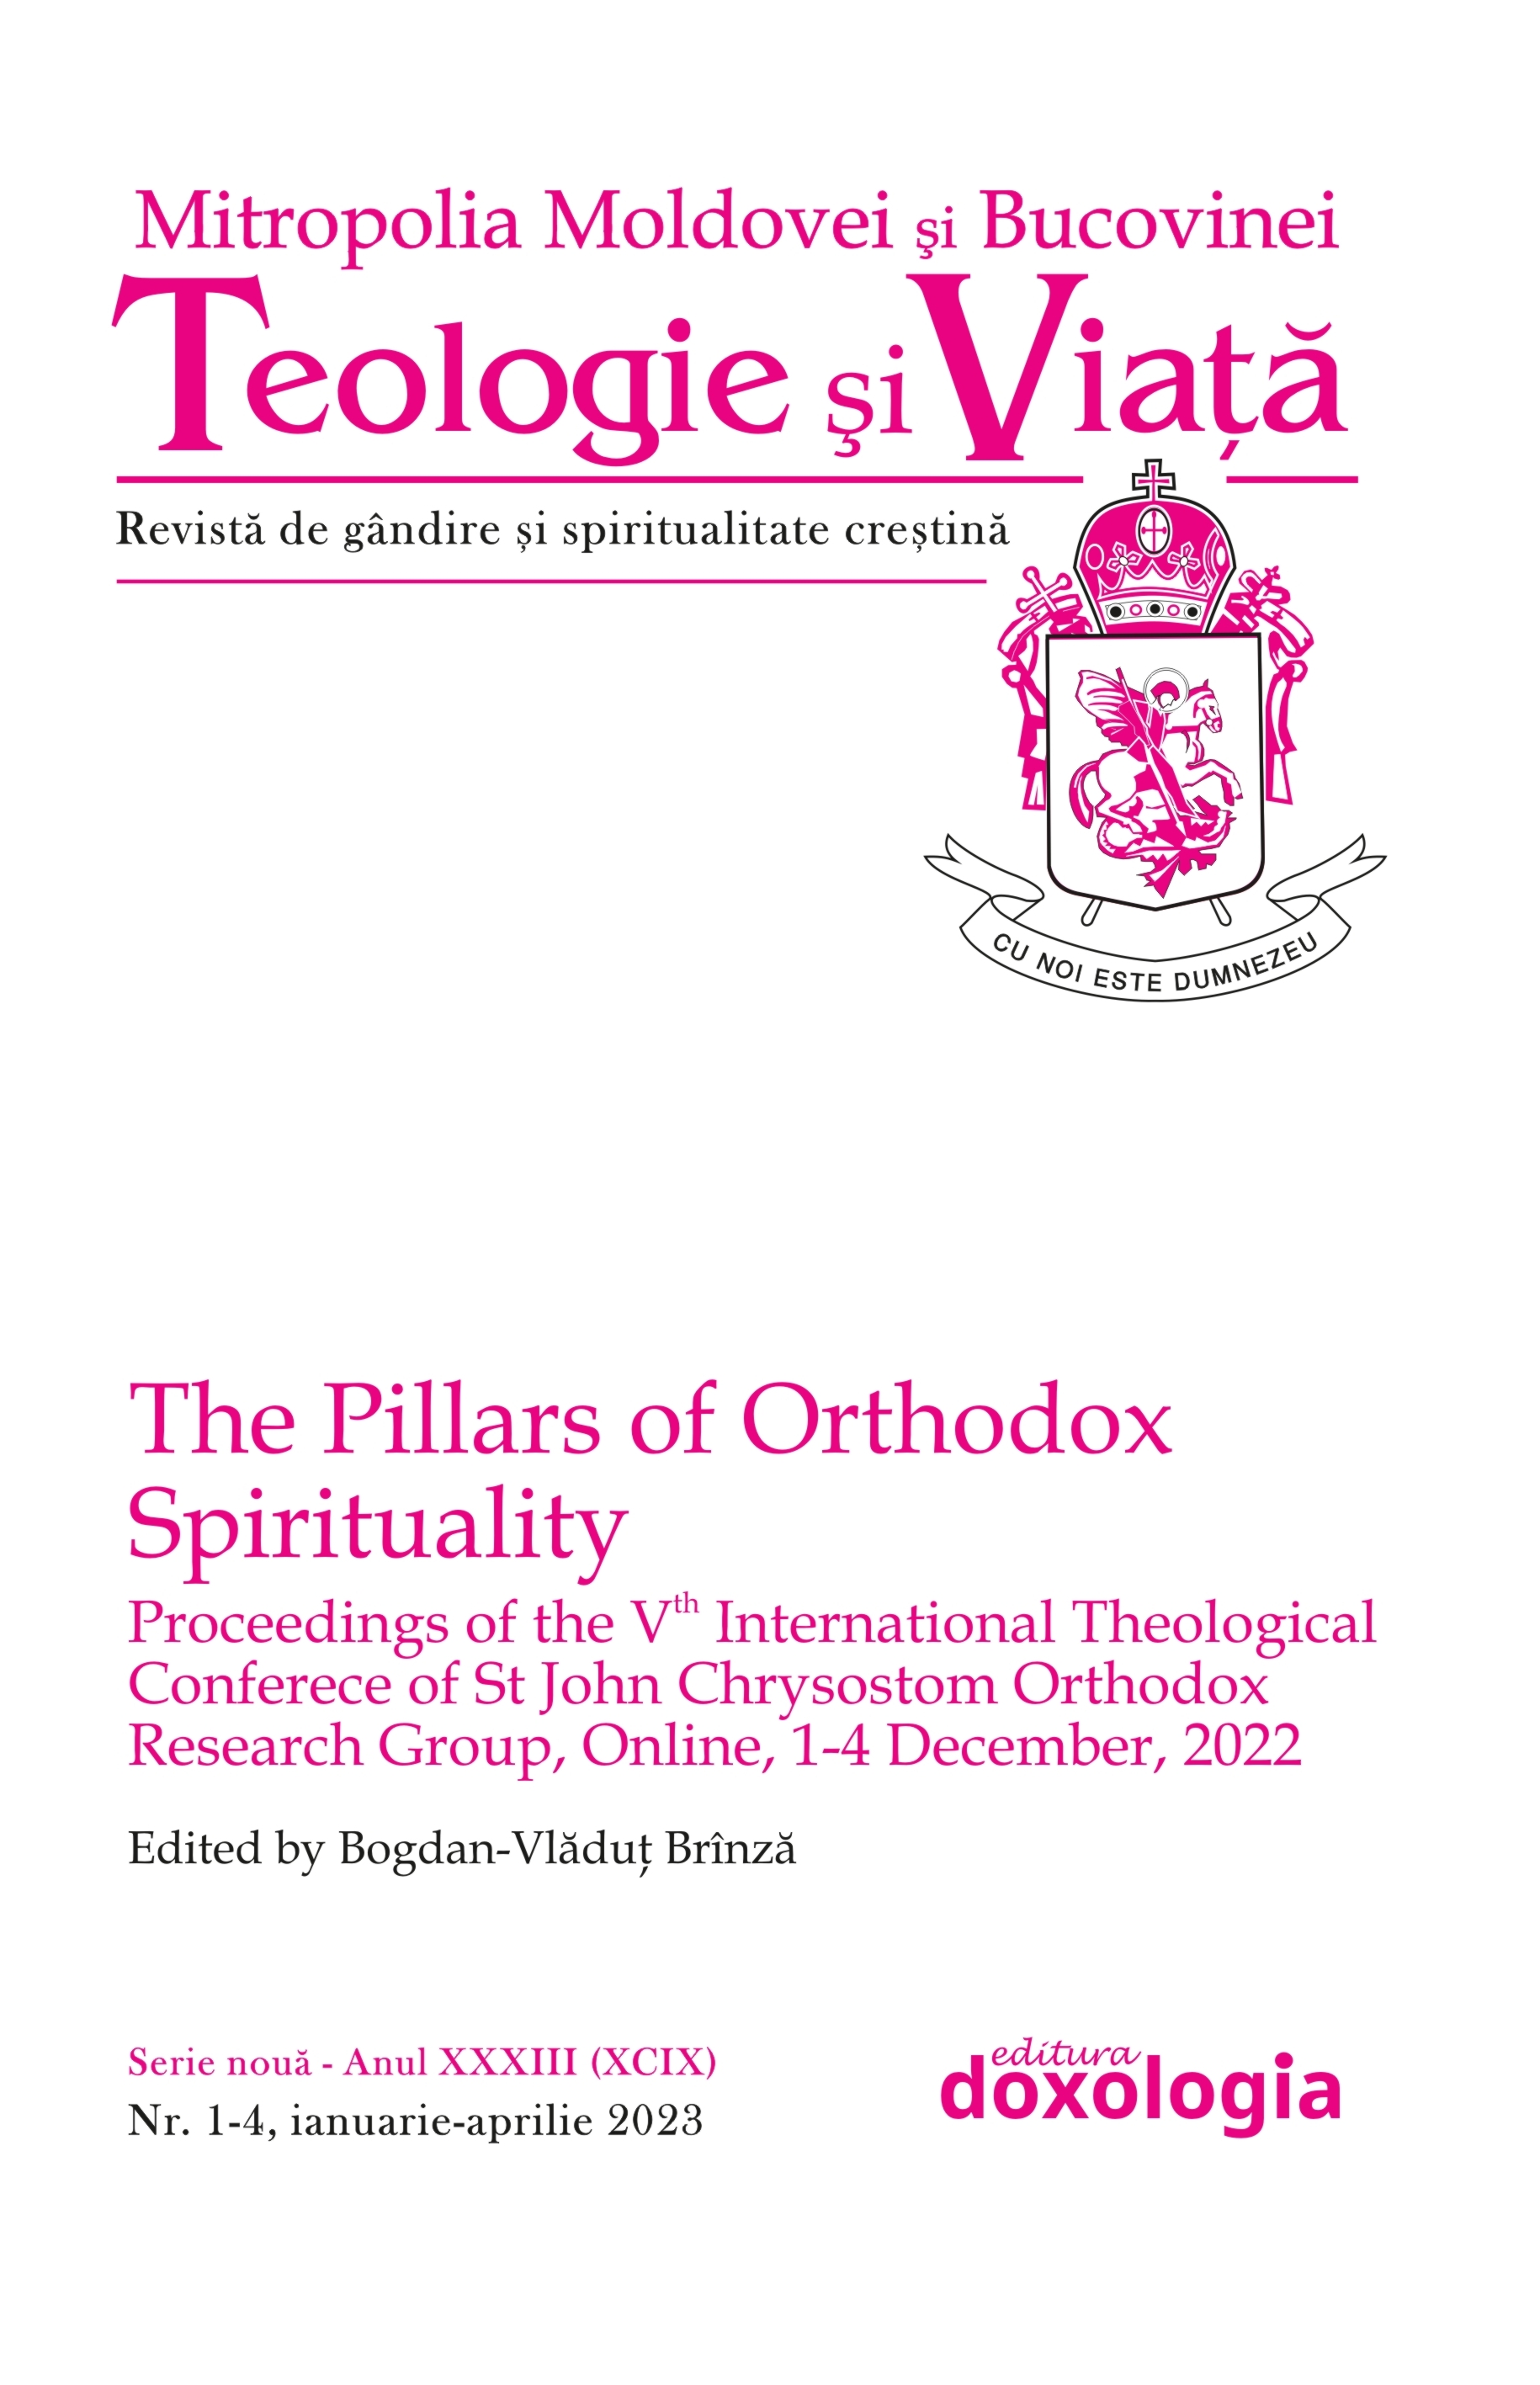 A charitable heart: orthodox spirituality in an age of global warming Cover Image